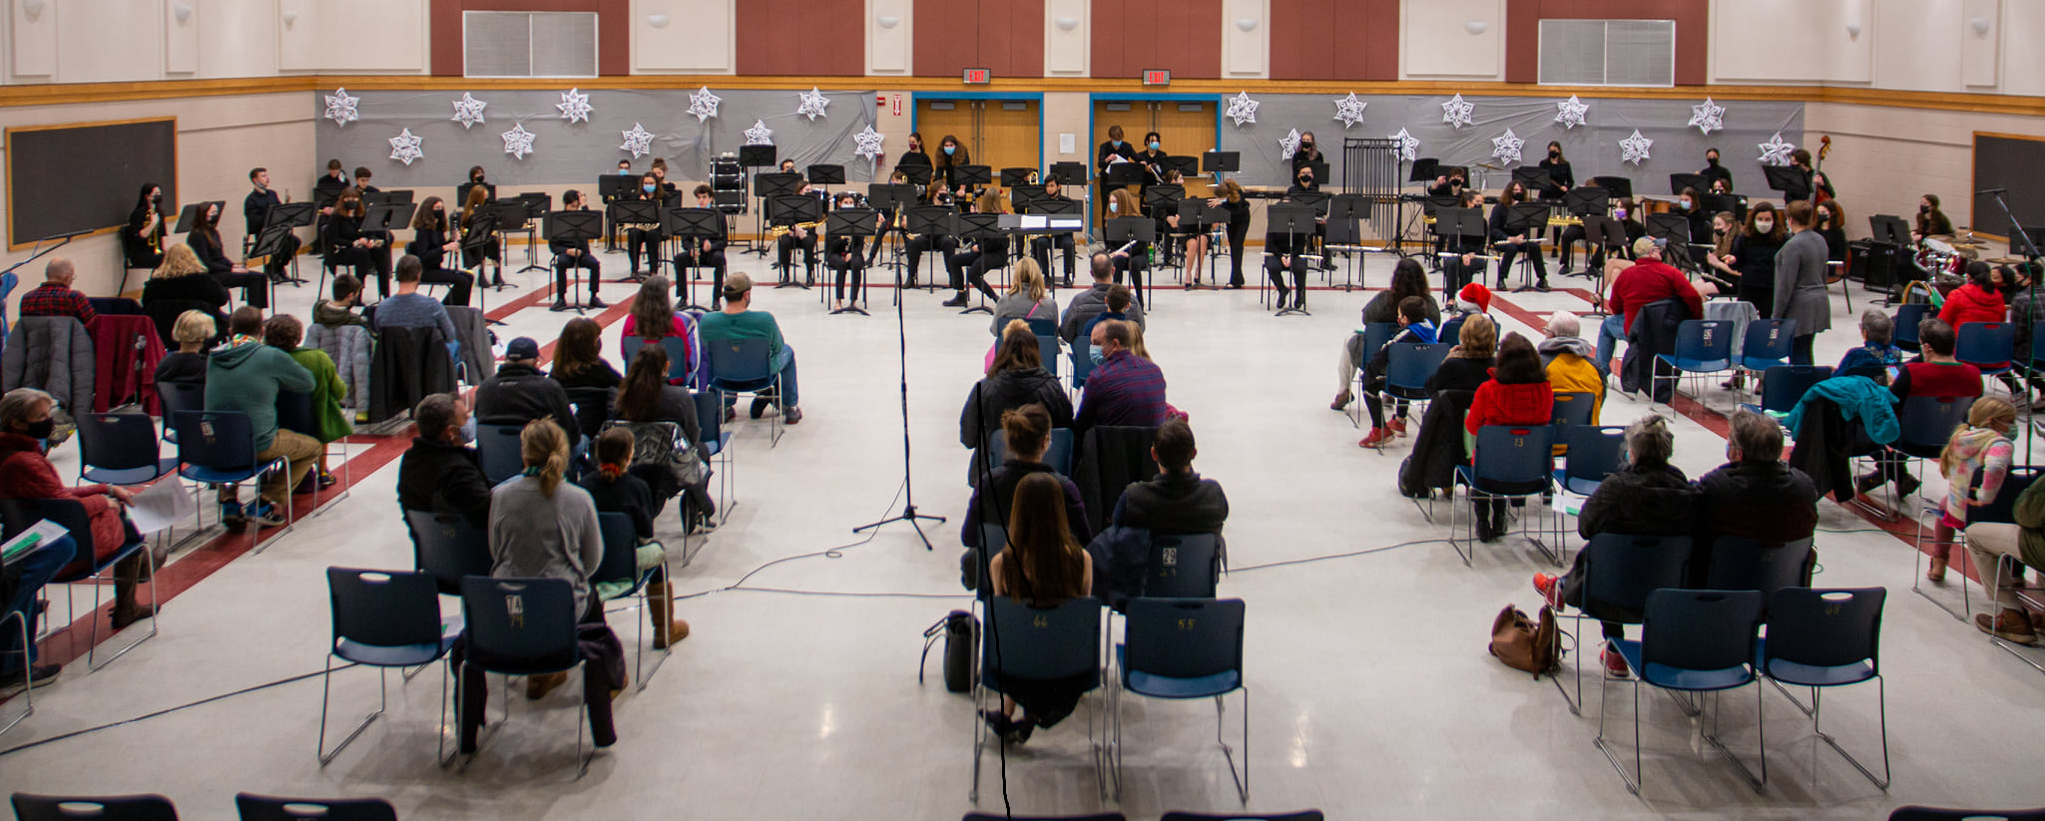 MHS Concert band at the 2021 Winter concert - photo by Criste Jhoanna Antonio